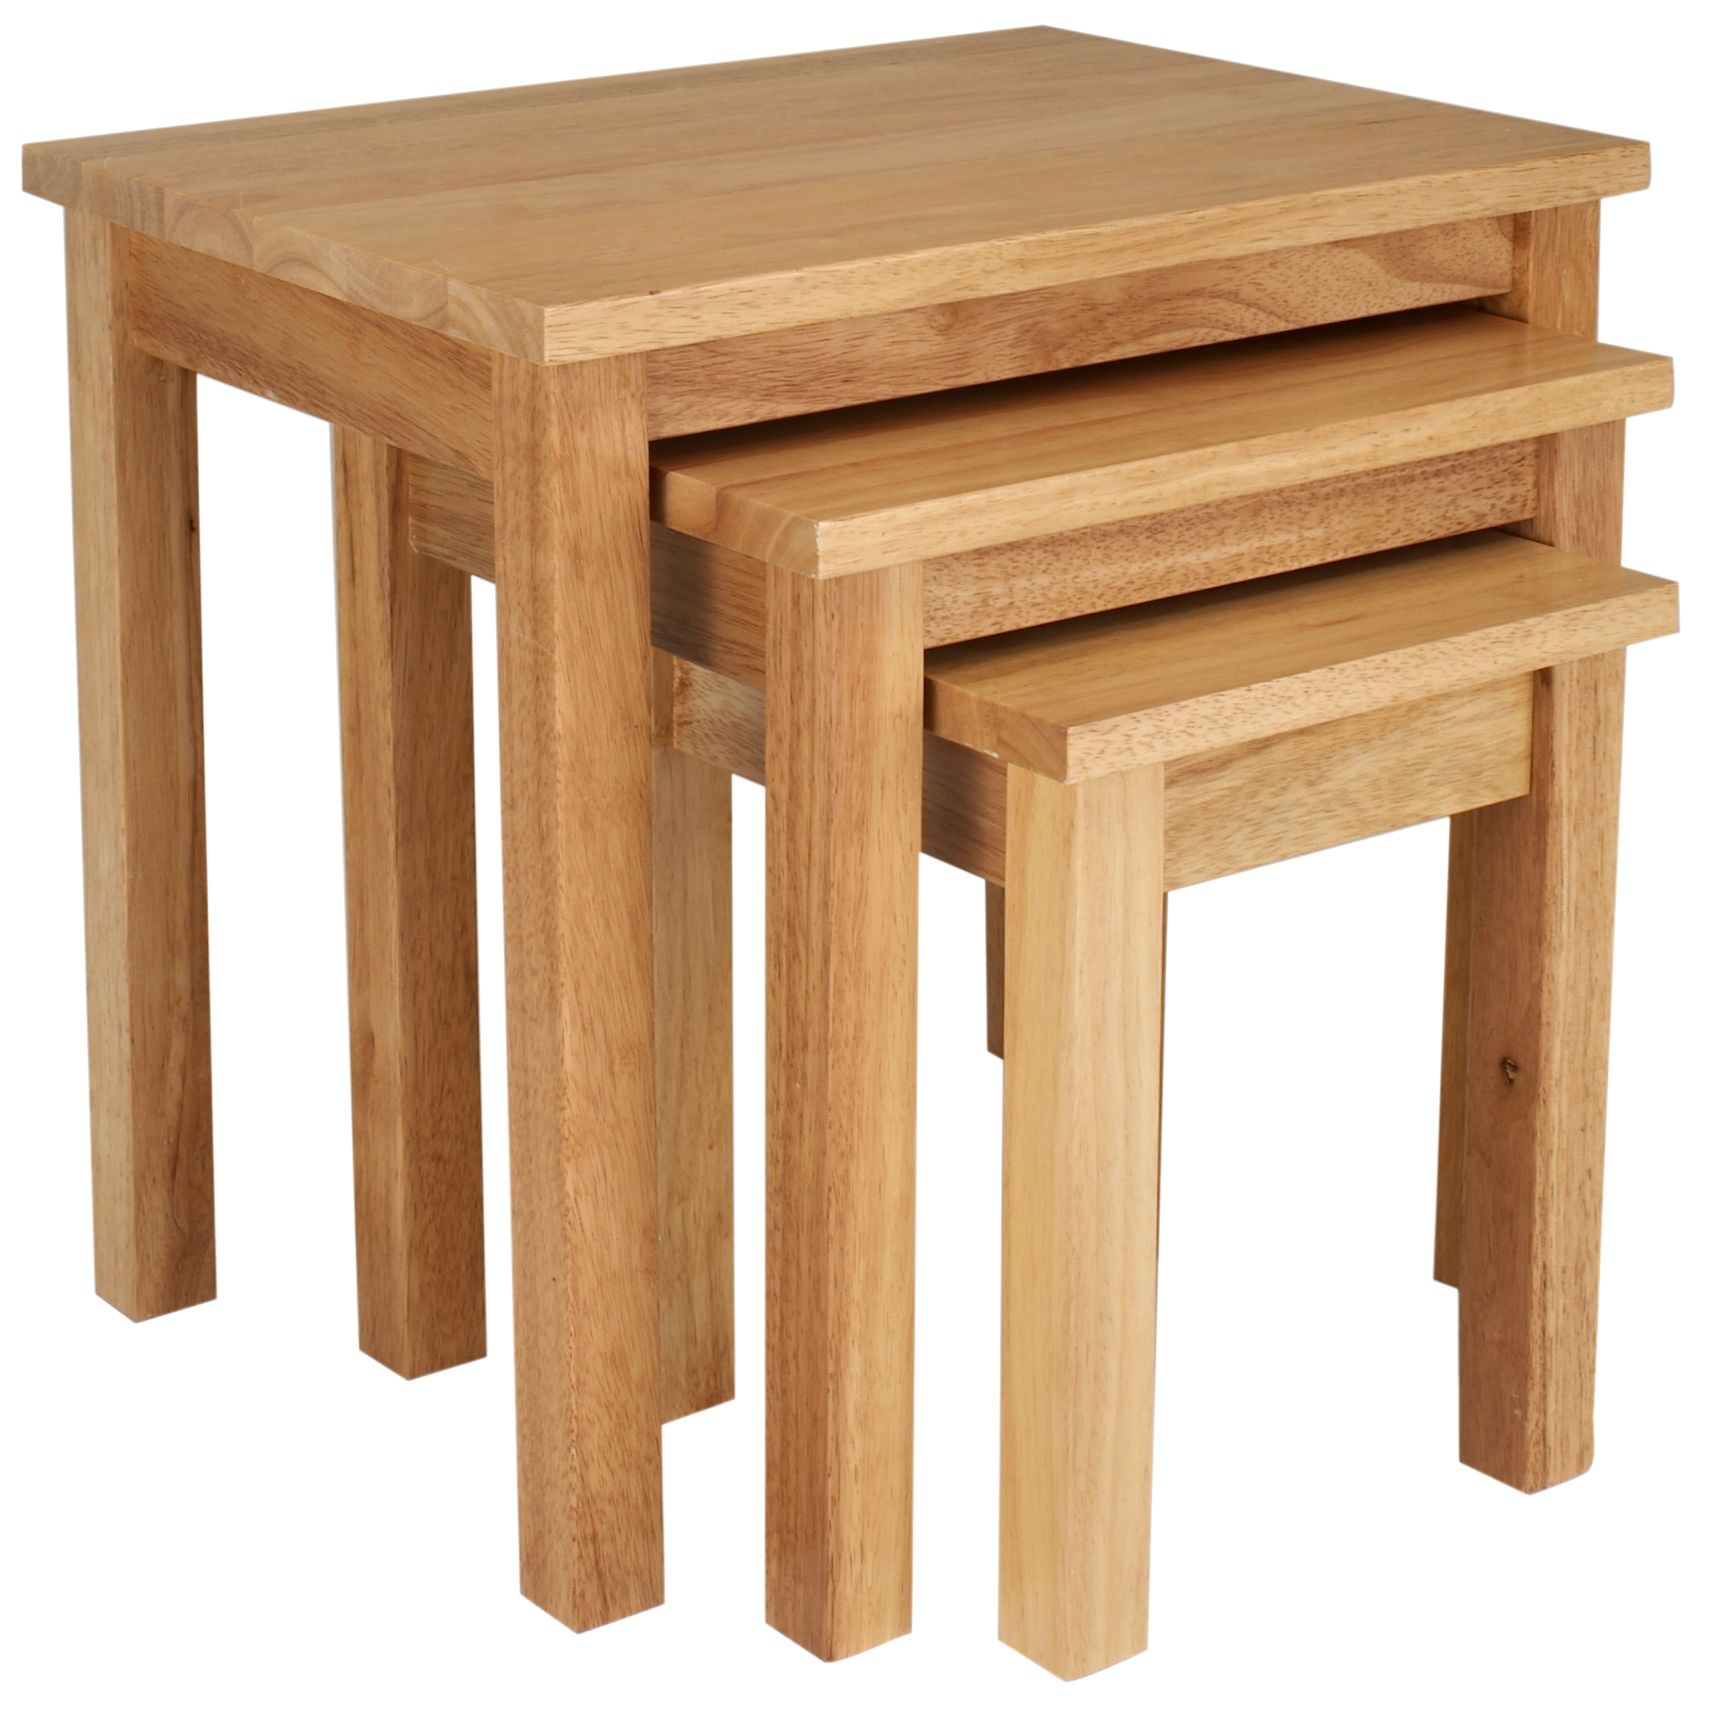 John Lewis Maine Nest of Tables, Set of 3